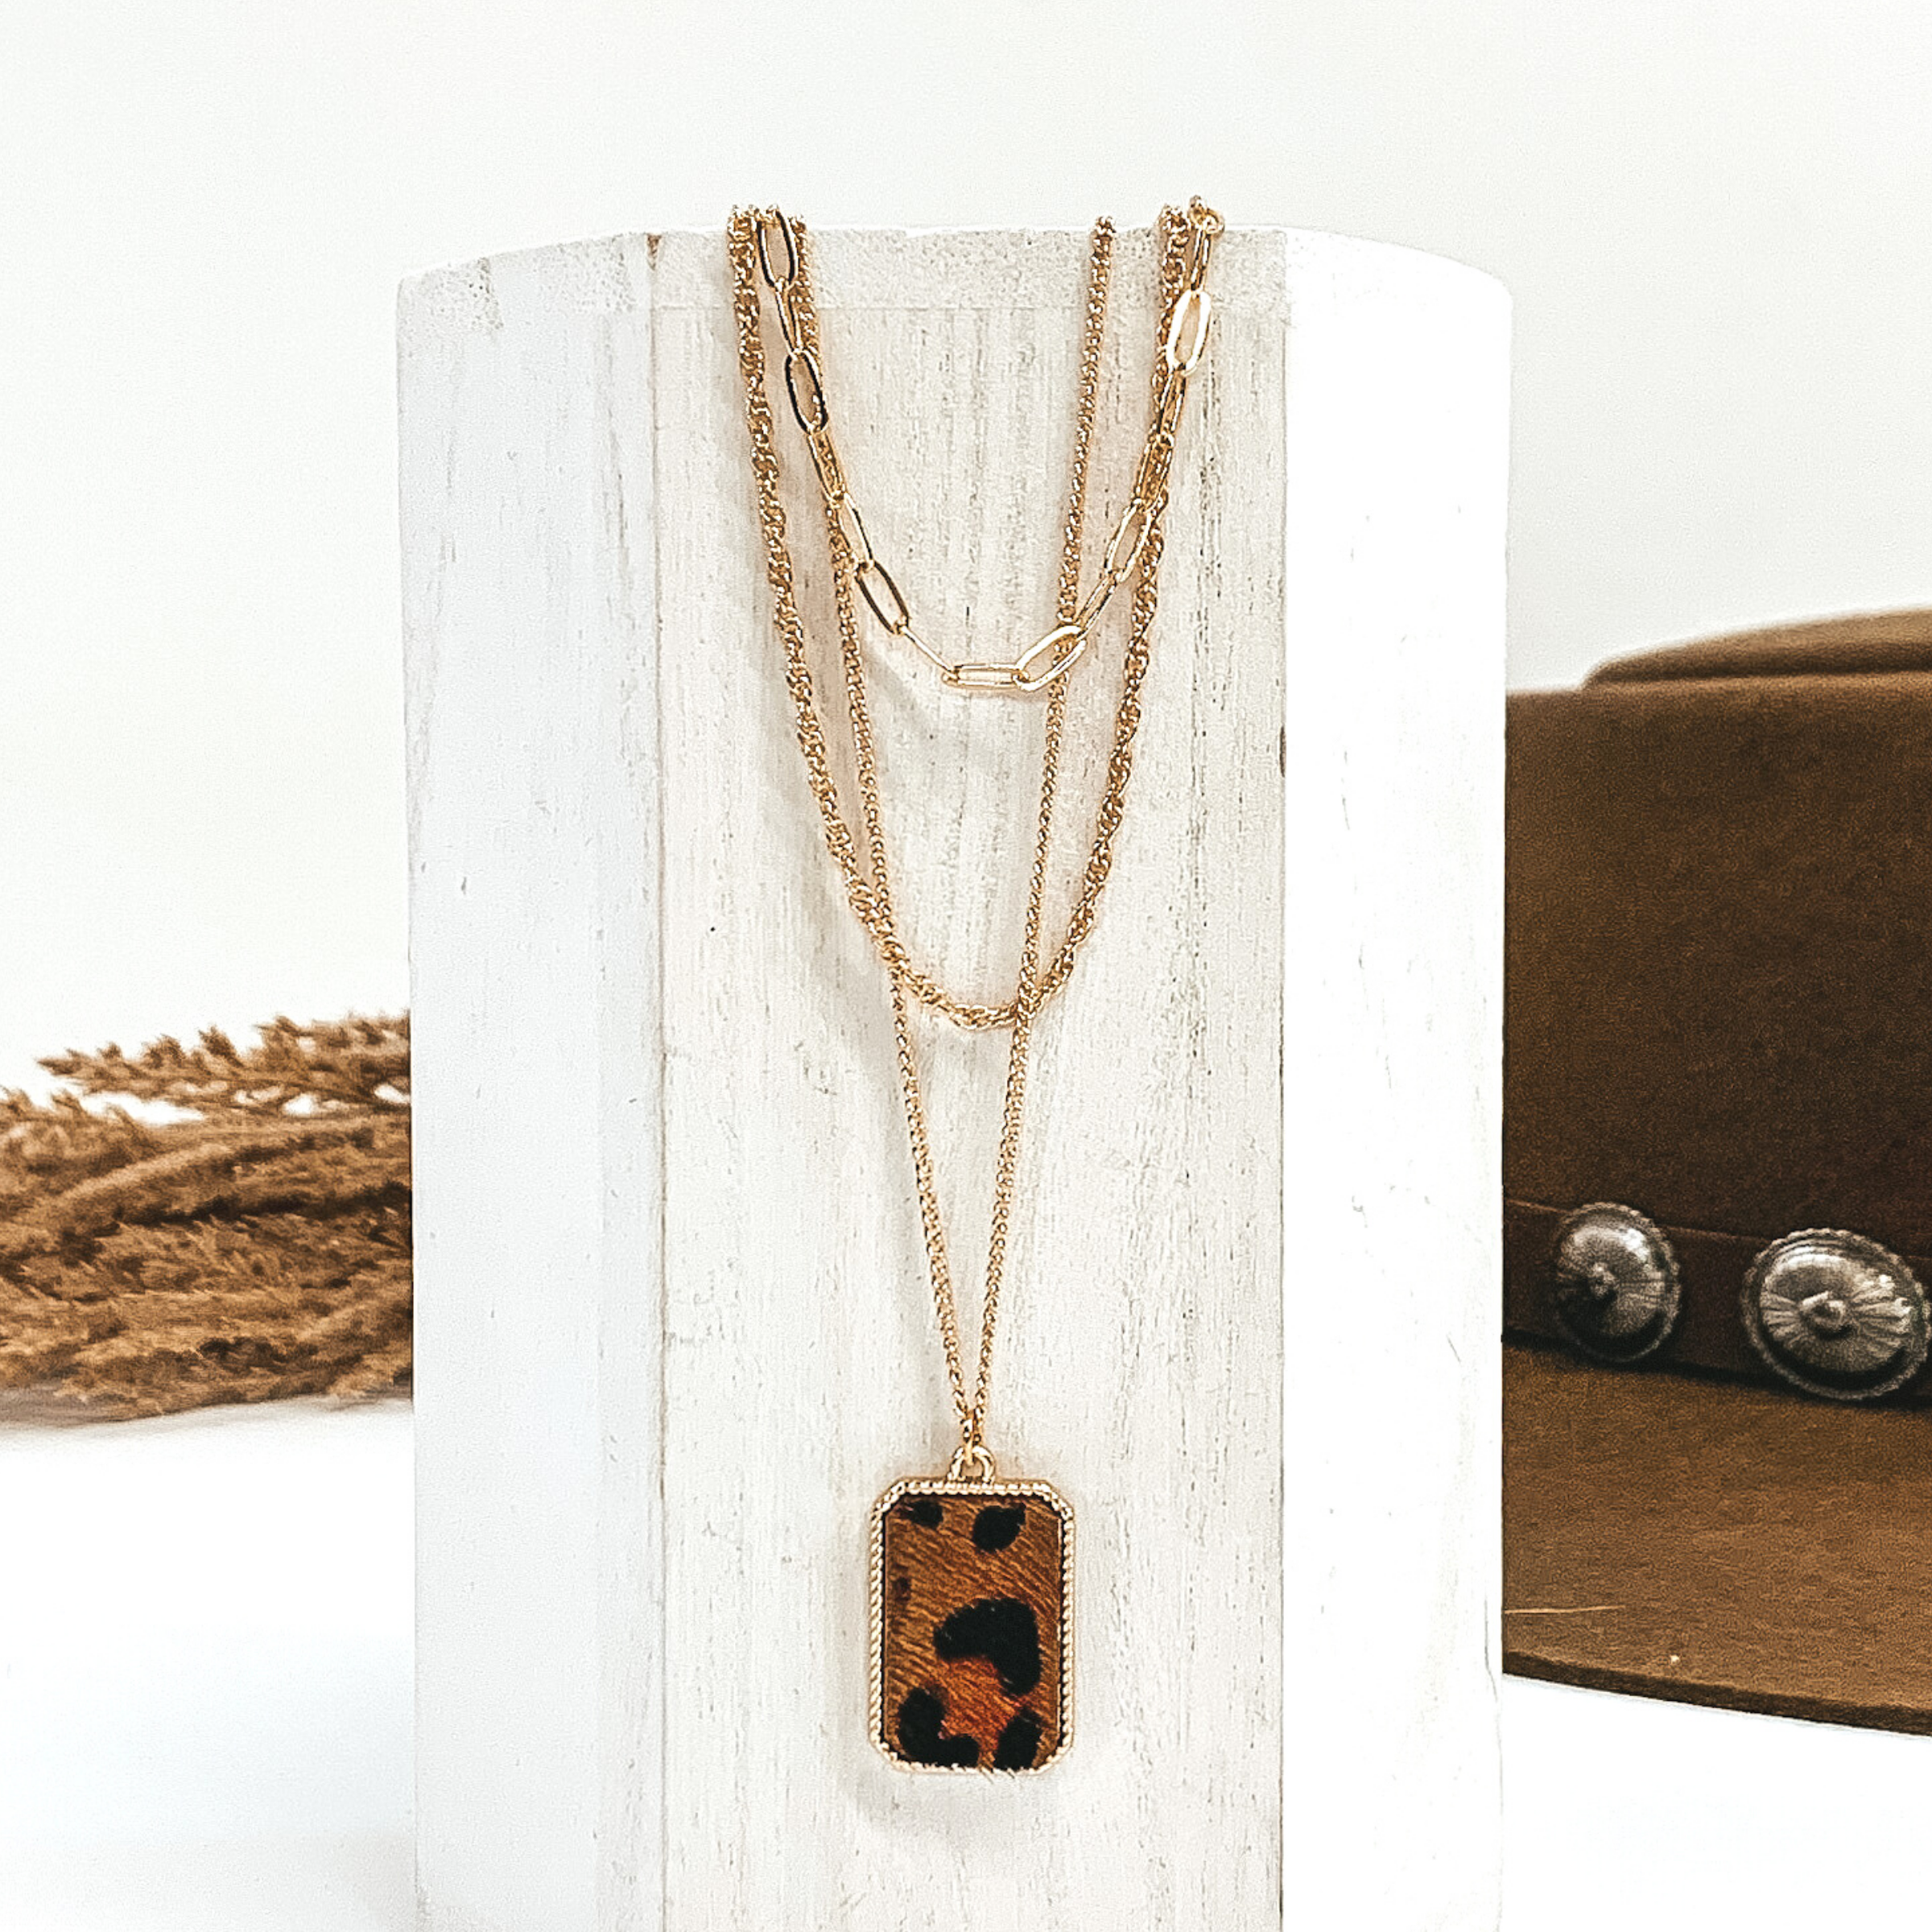 There are three different gold chains at different lengths laying on a white piece of wood. The longest chain has gold rectangle pendant with a brown and black animal print inlay. This is all pictured on a white background with a brown hat and brown floral in the background.